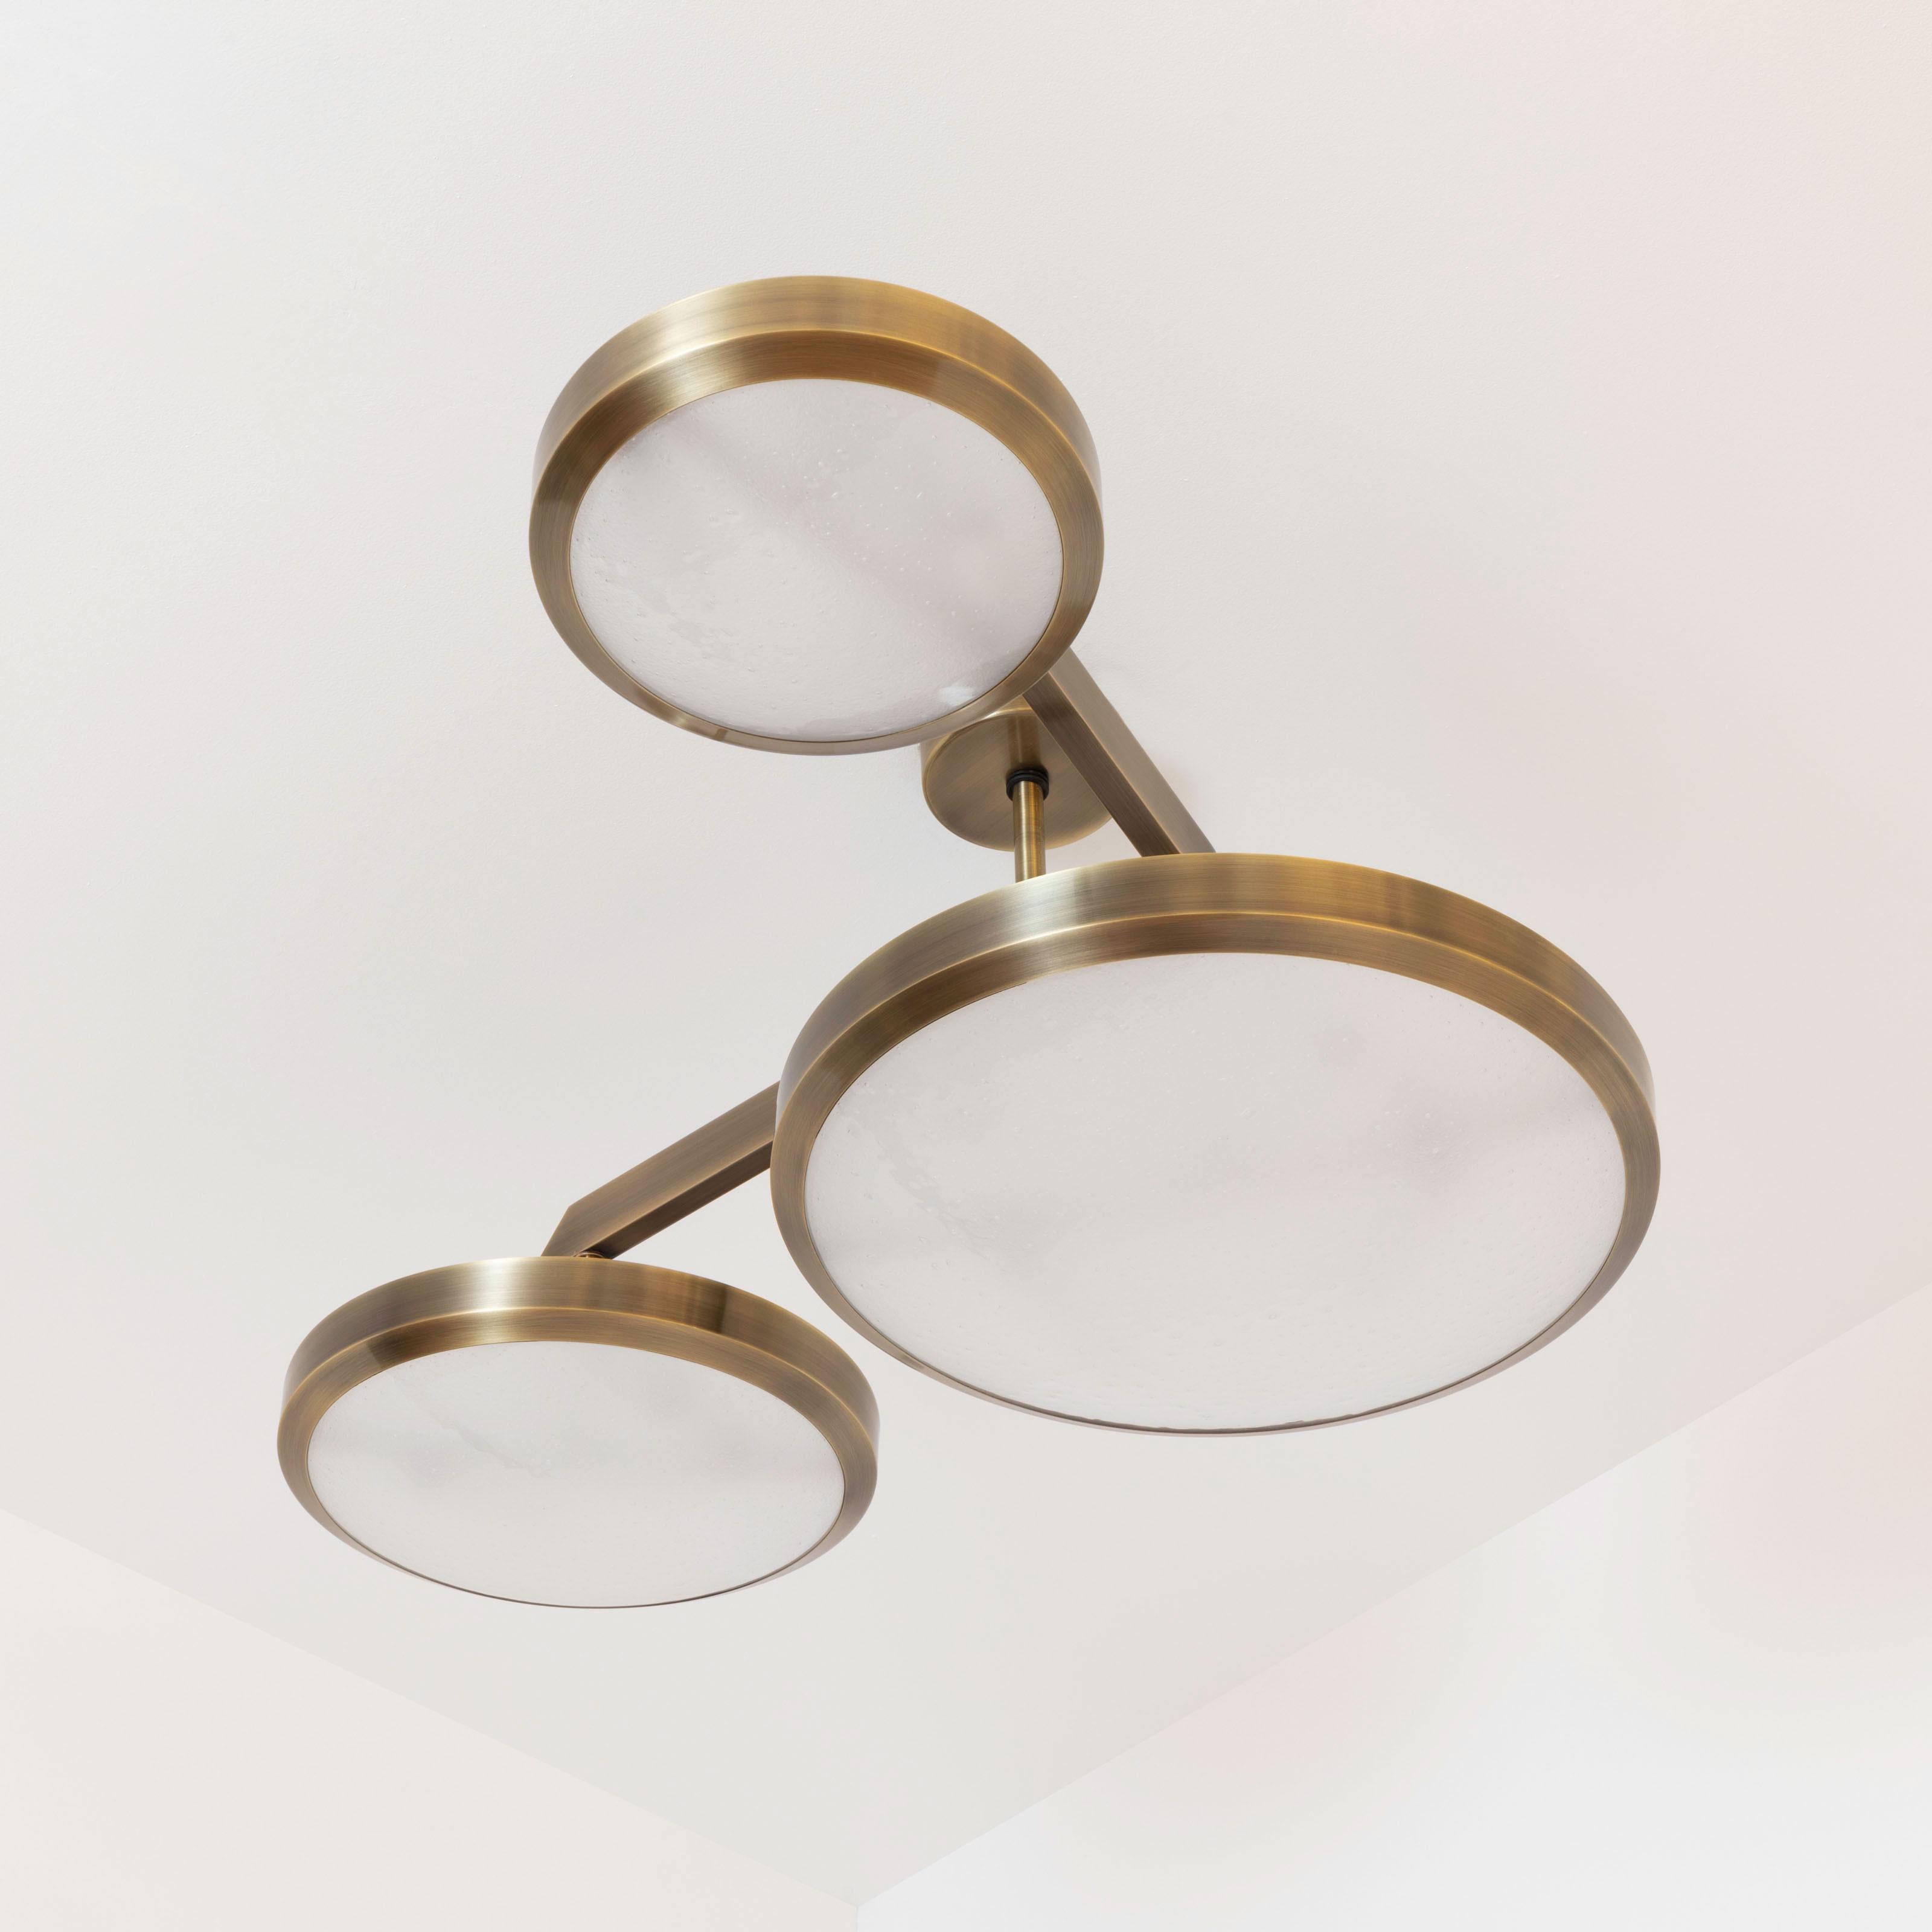 Zeta Ceiling Light by Gaspare Asaro - Satin Brass Finish For Sale 2